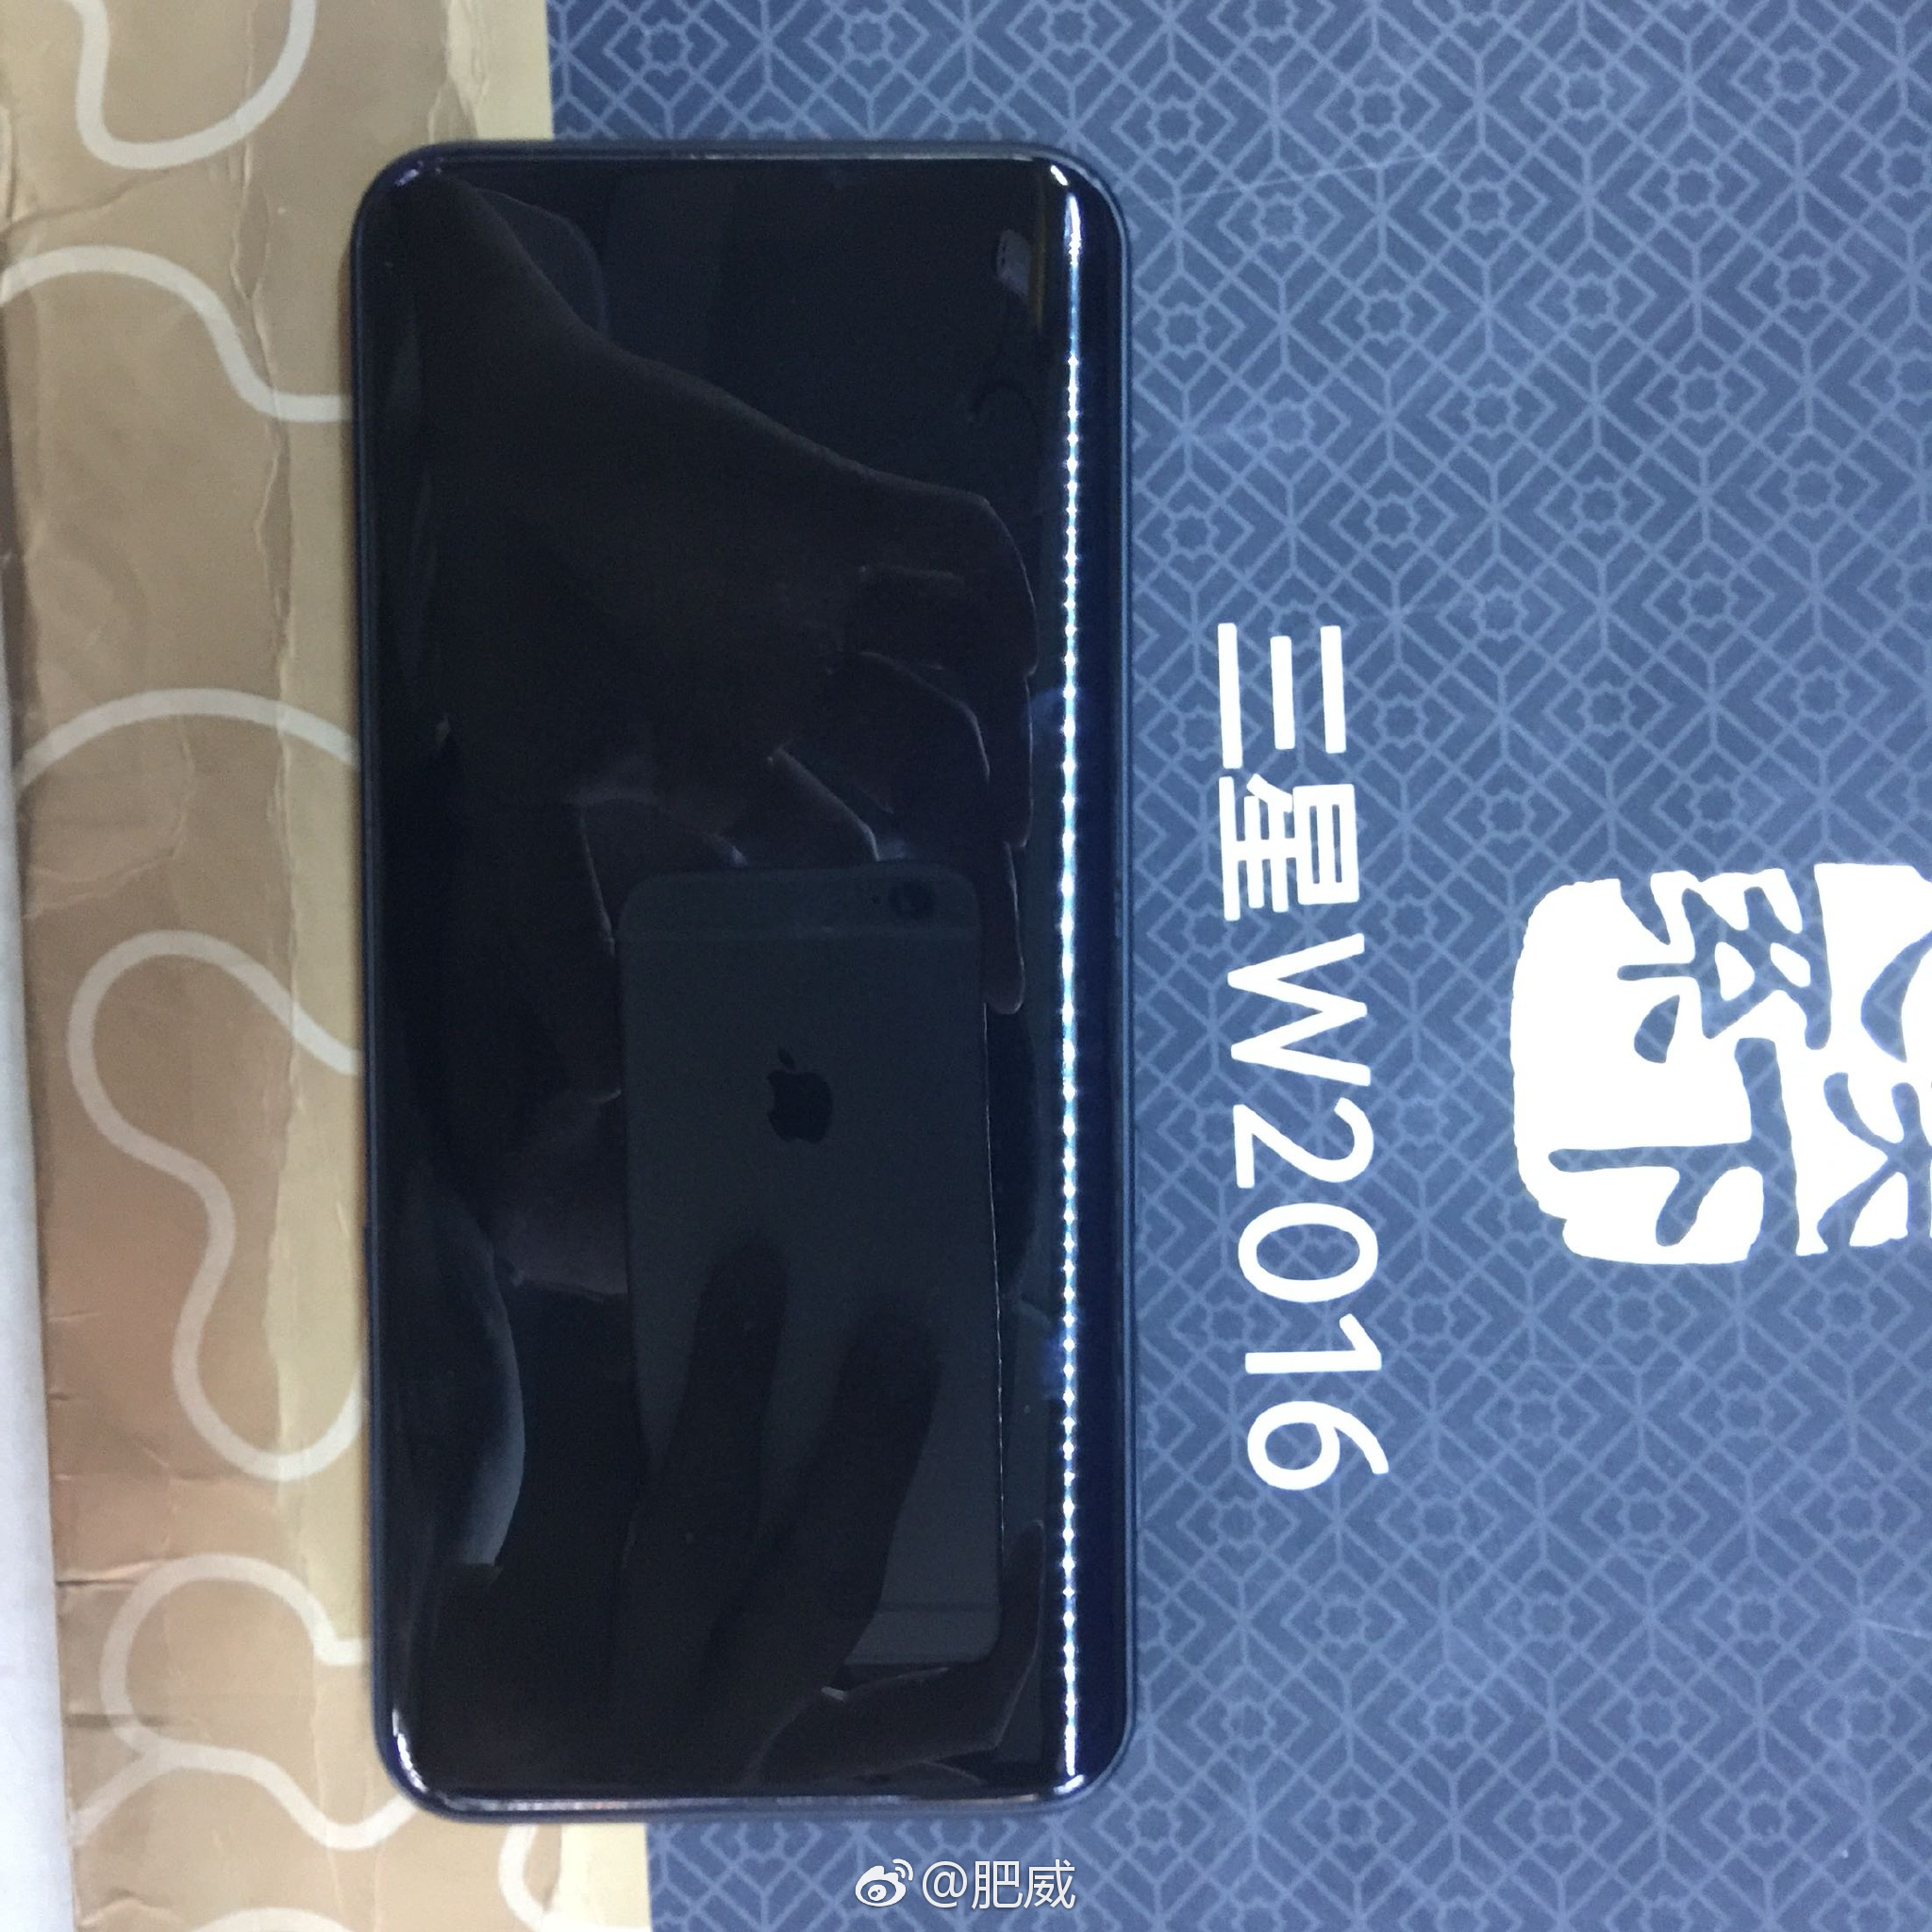 Black color Galaxy S8 leaks in new pics 6